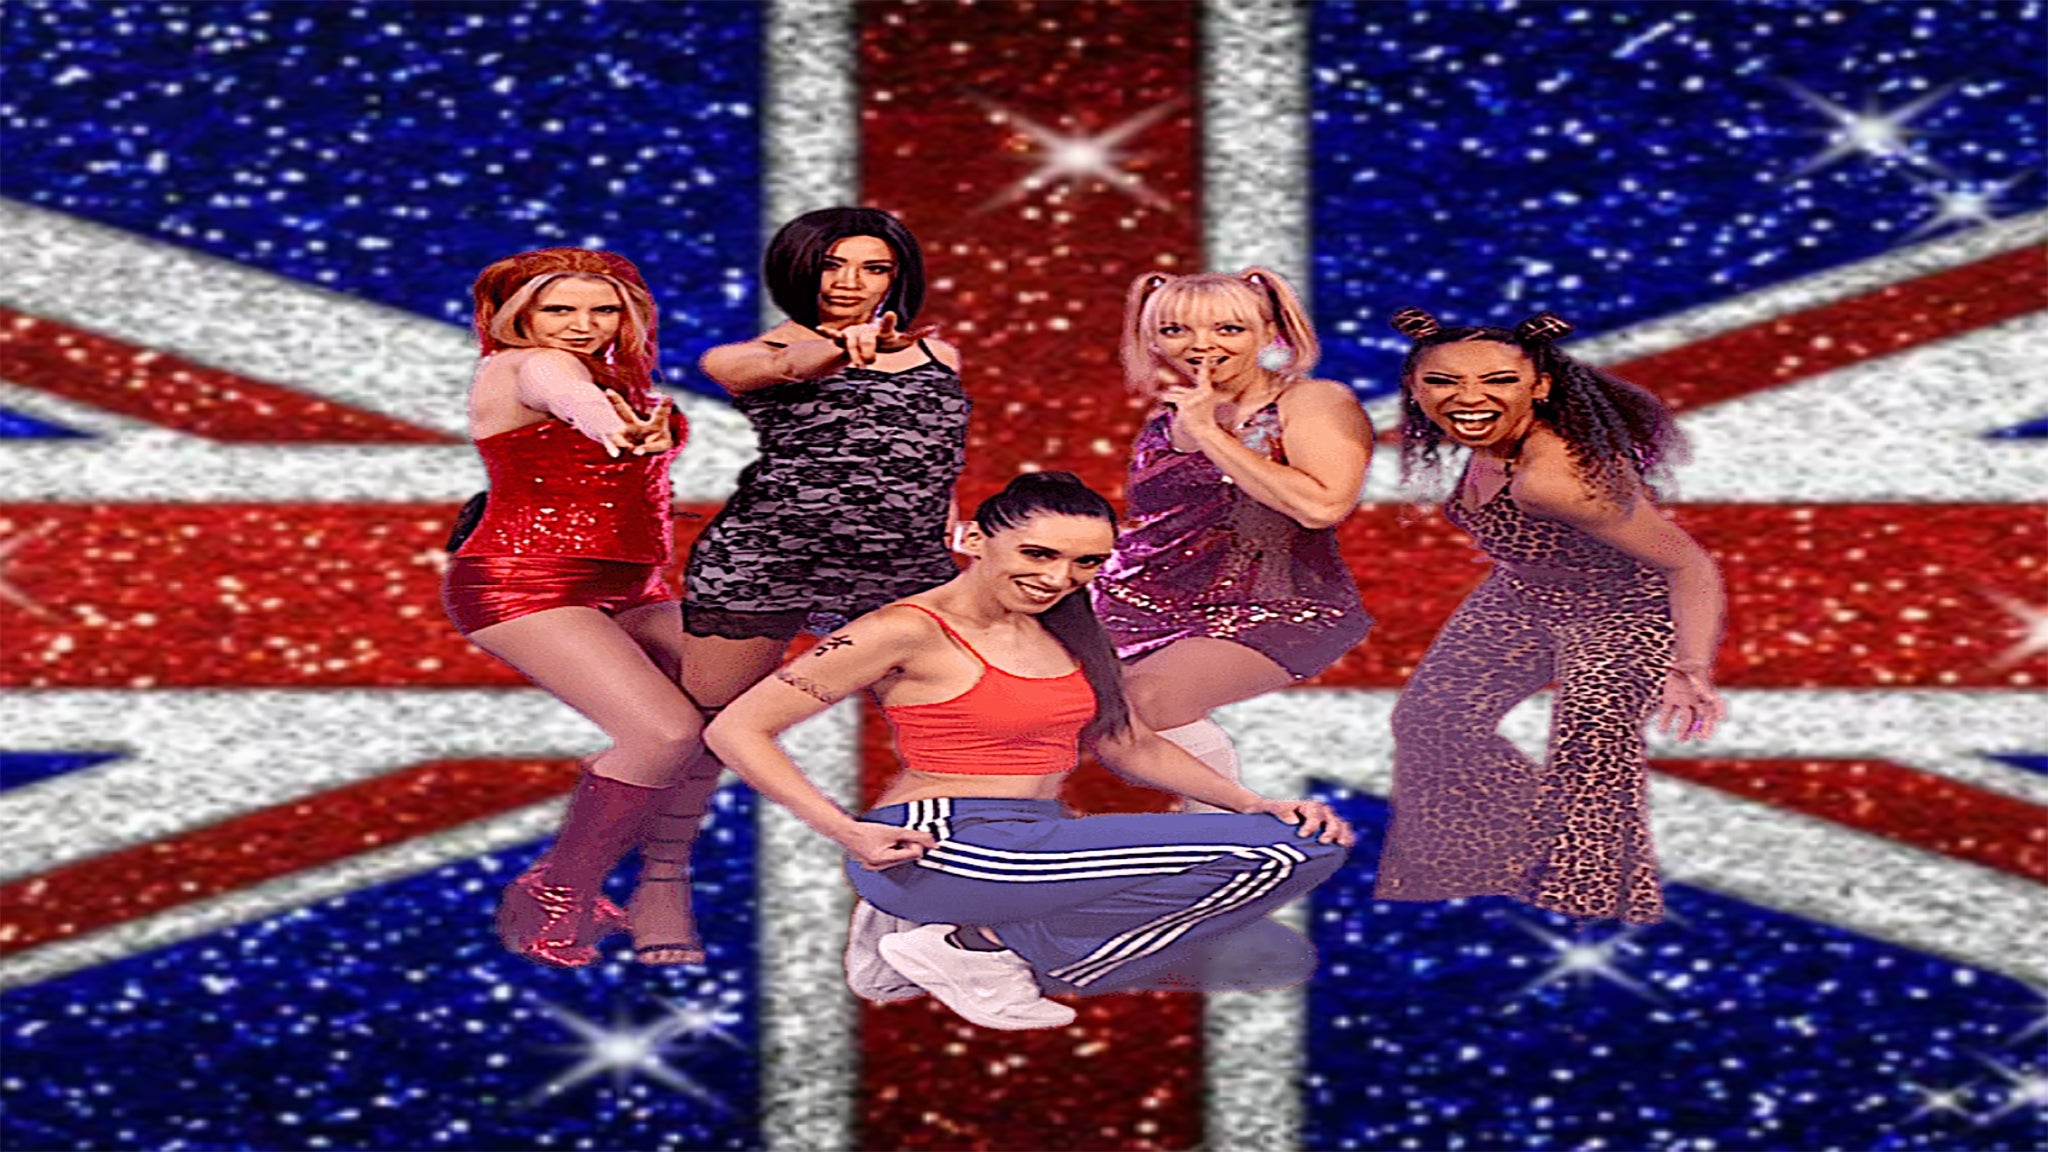 Spice Wannabe - The Spice Girls Tribute